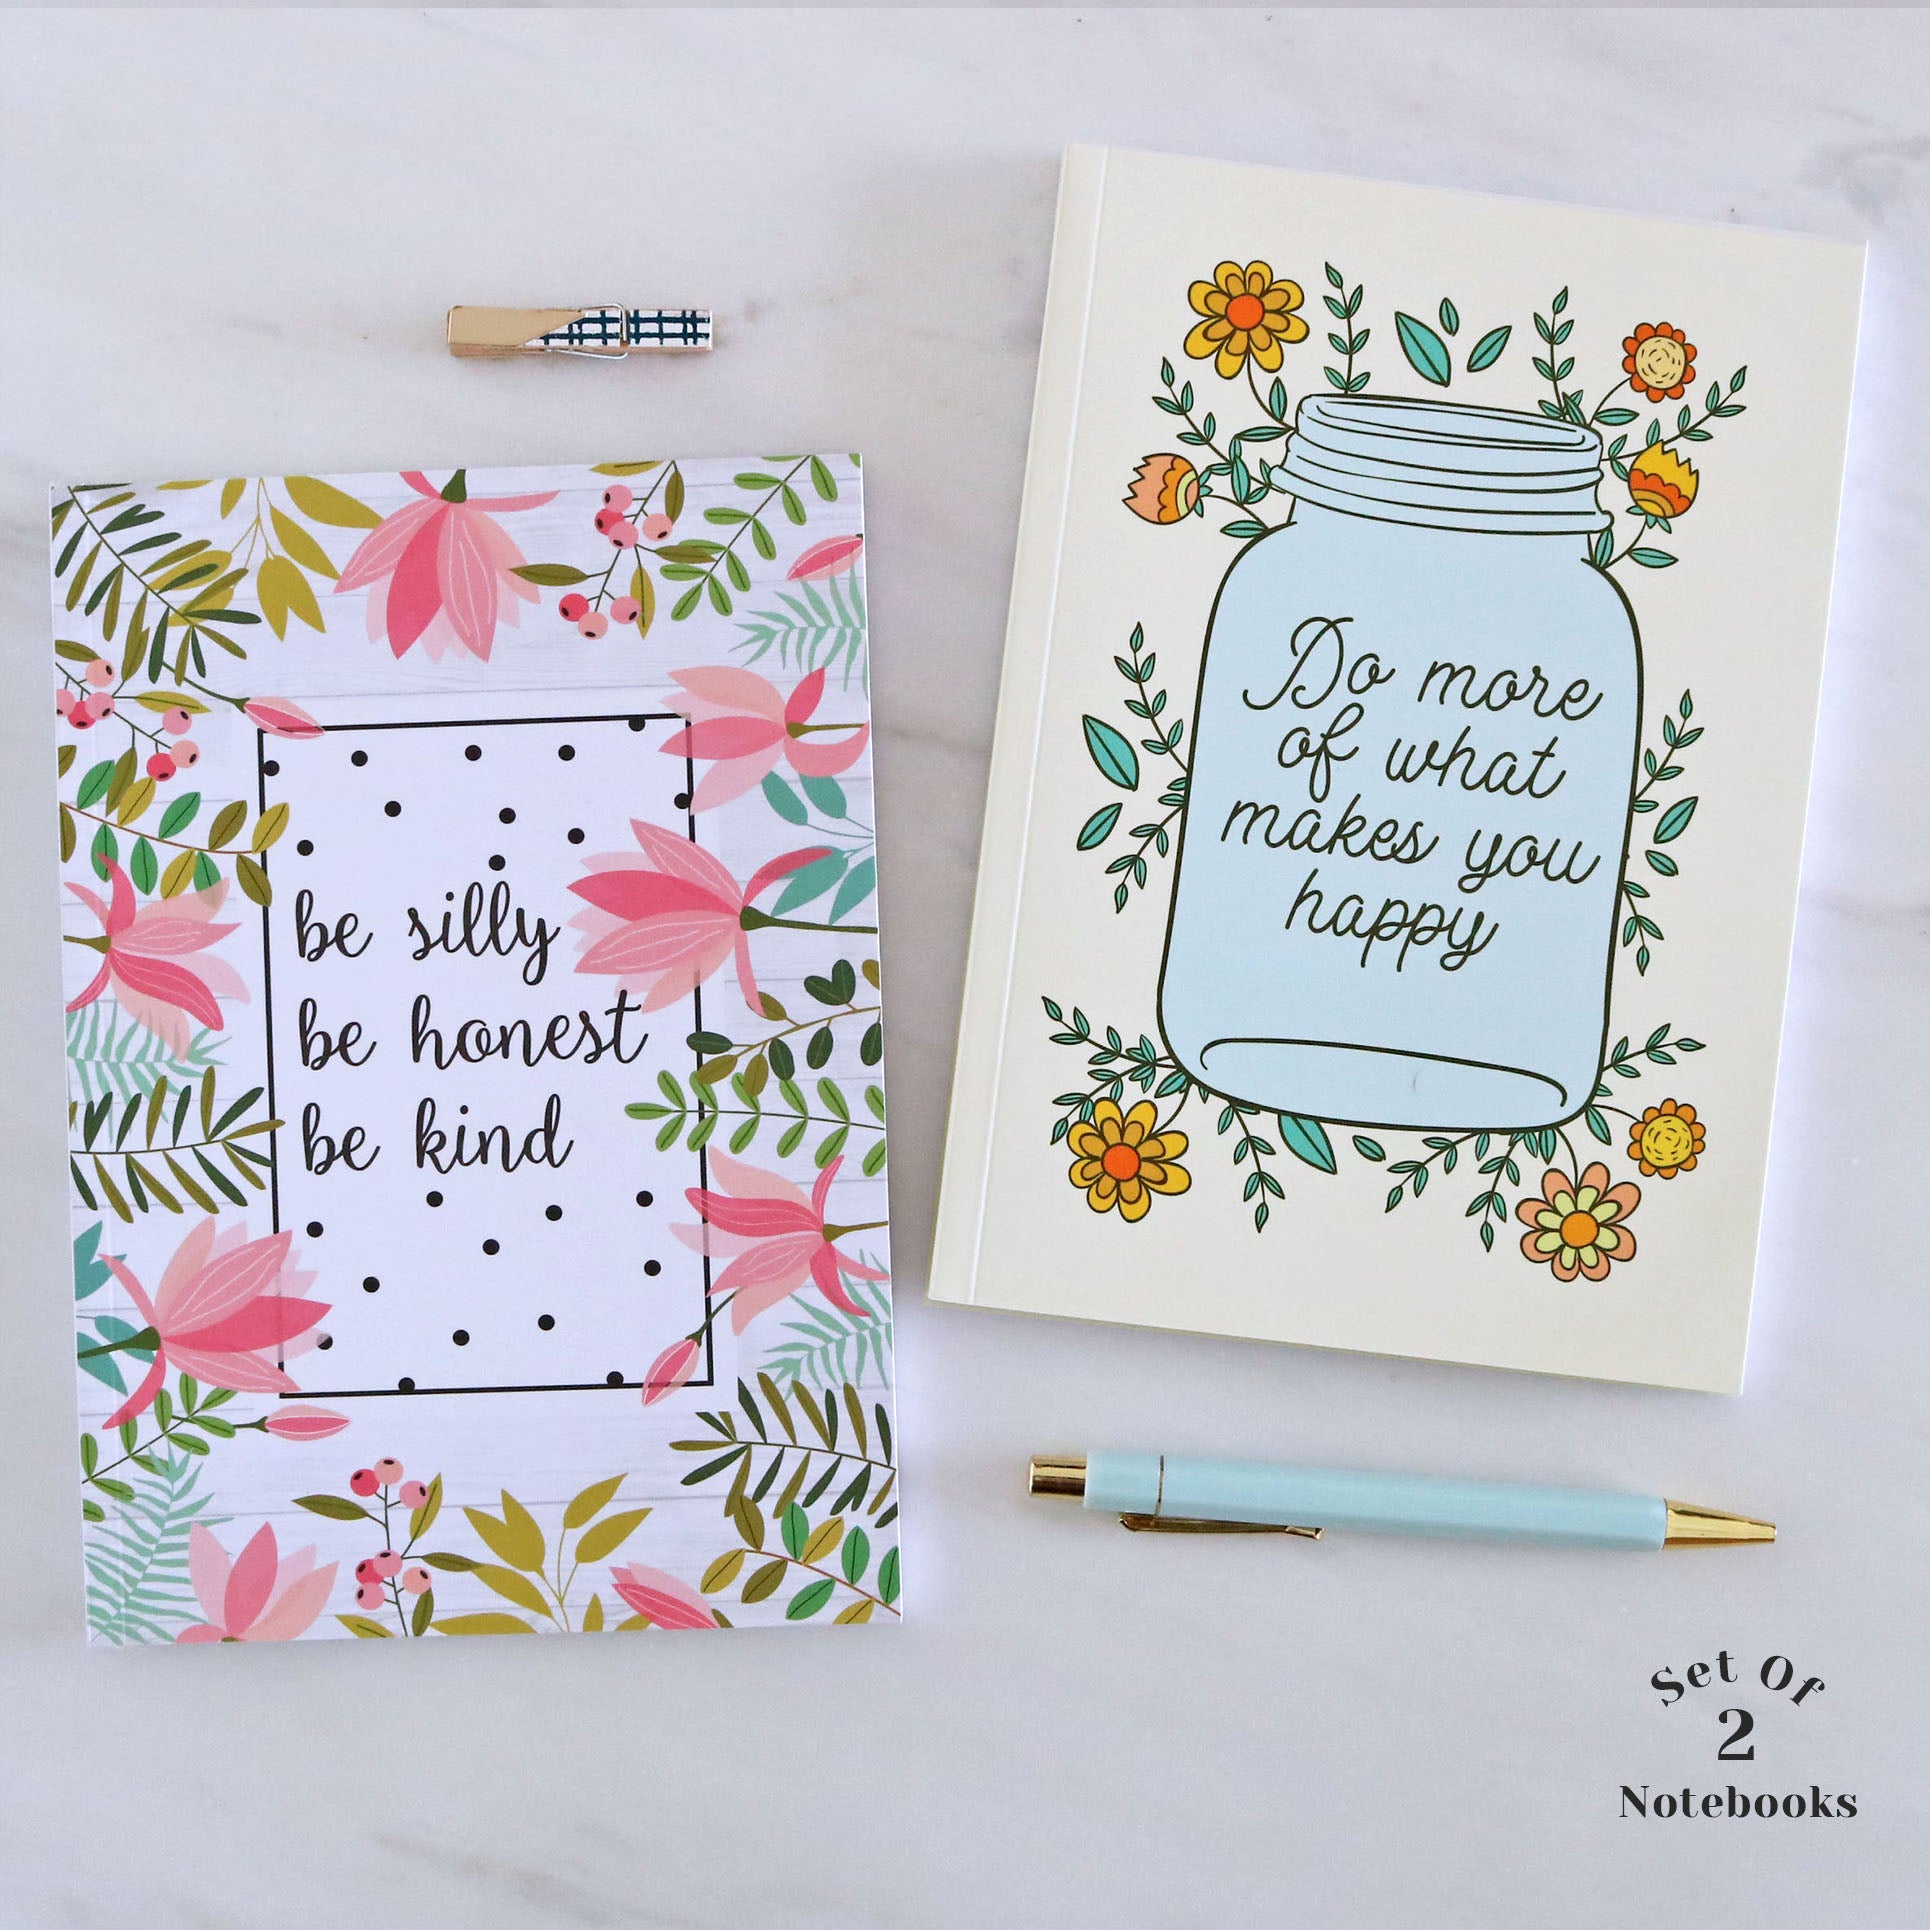 Set of 2 Notebooks - Be Silly & Do More Of